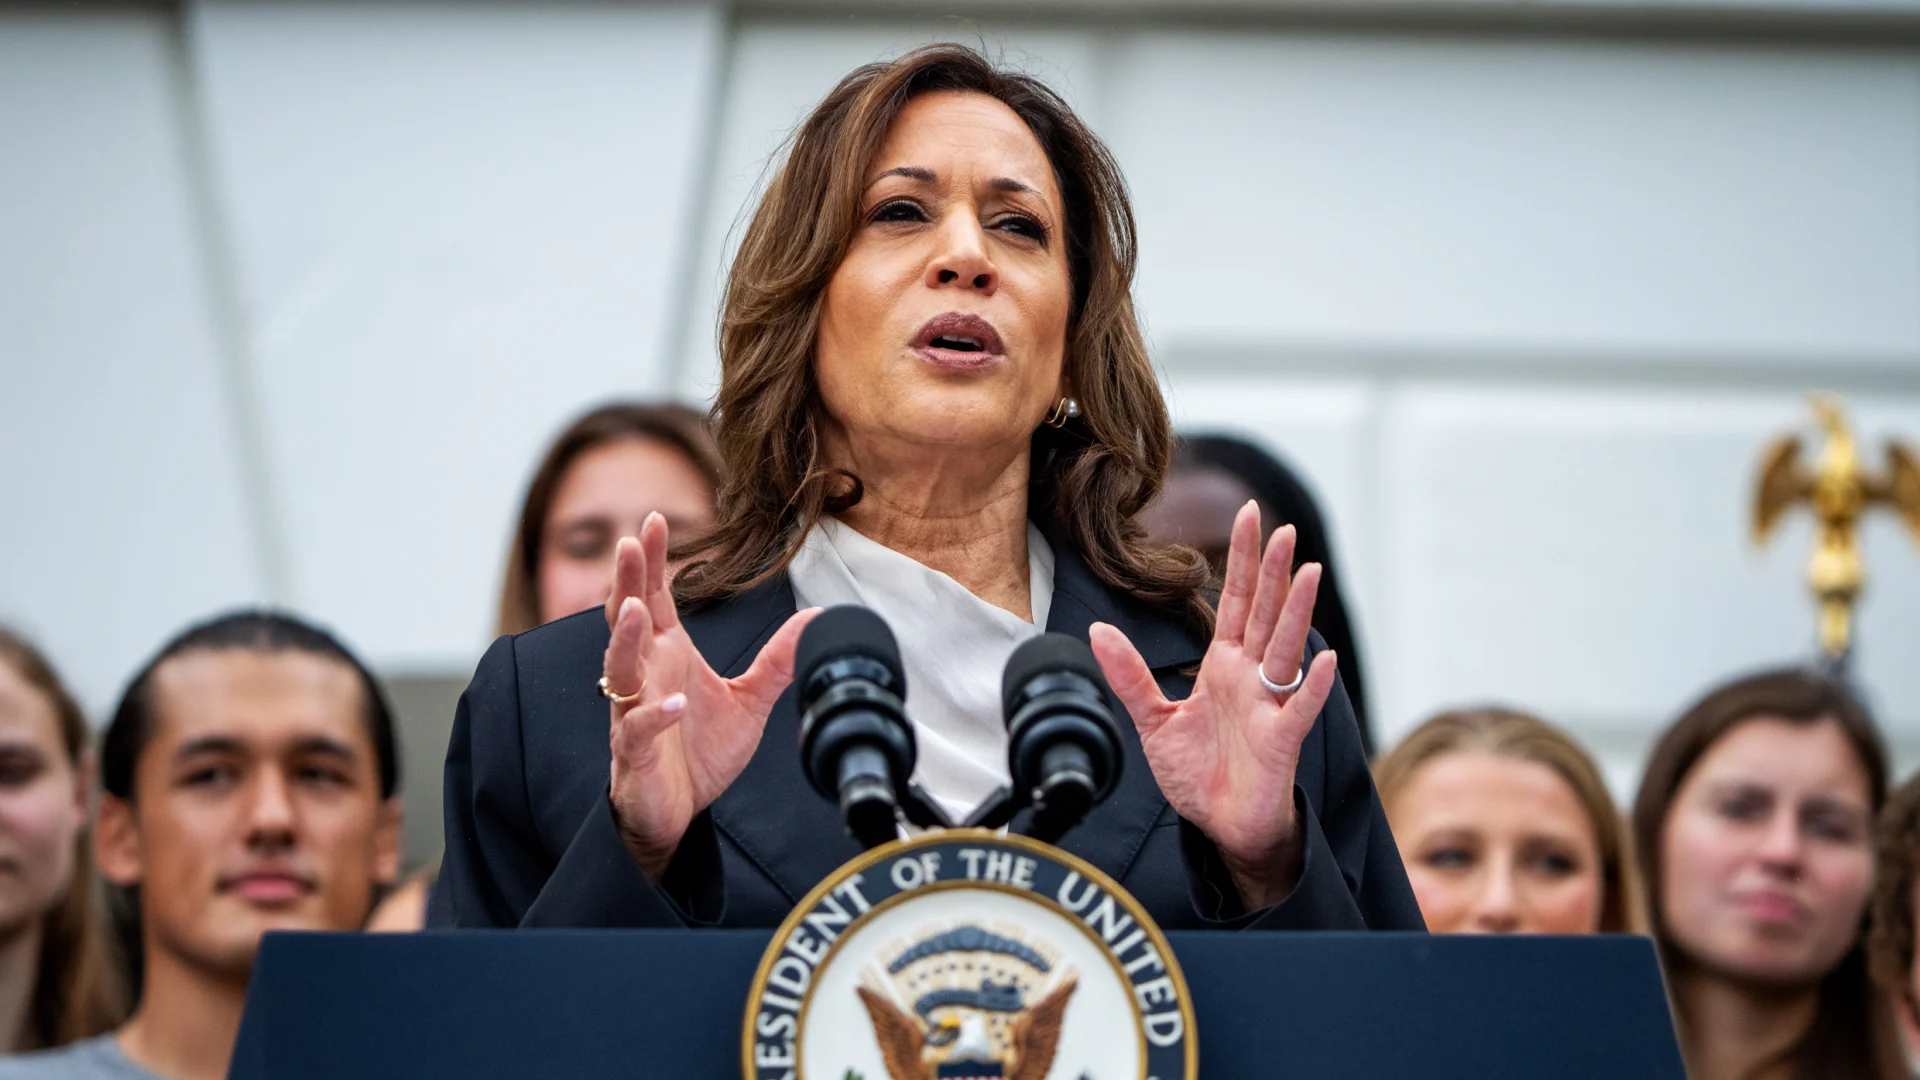 What people mean when they call Kamala Harris a ‘DEI candidate’